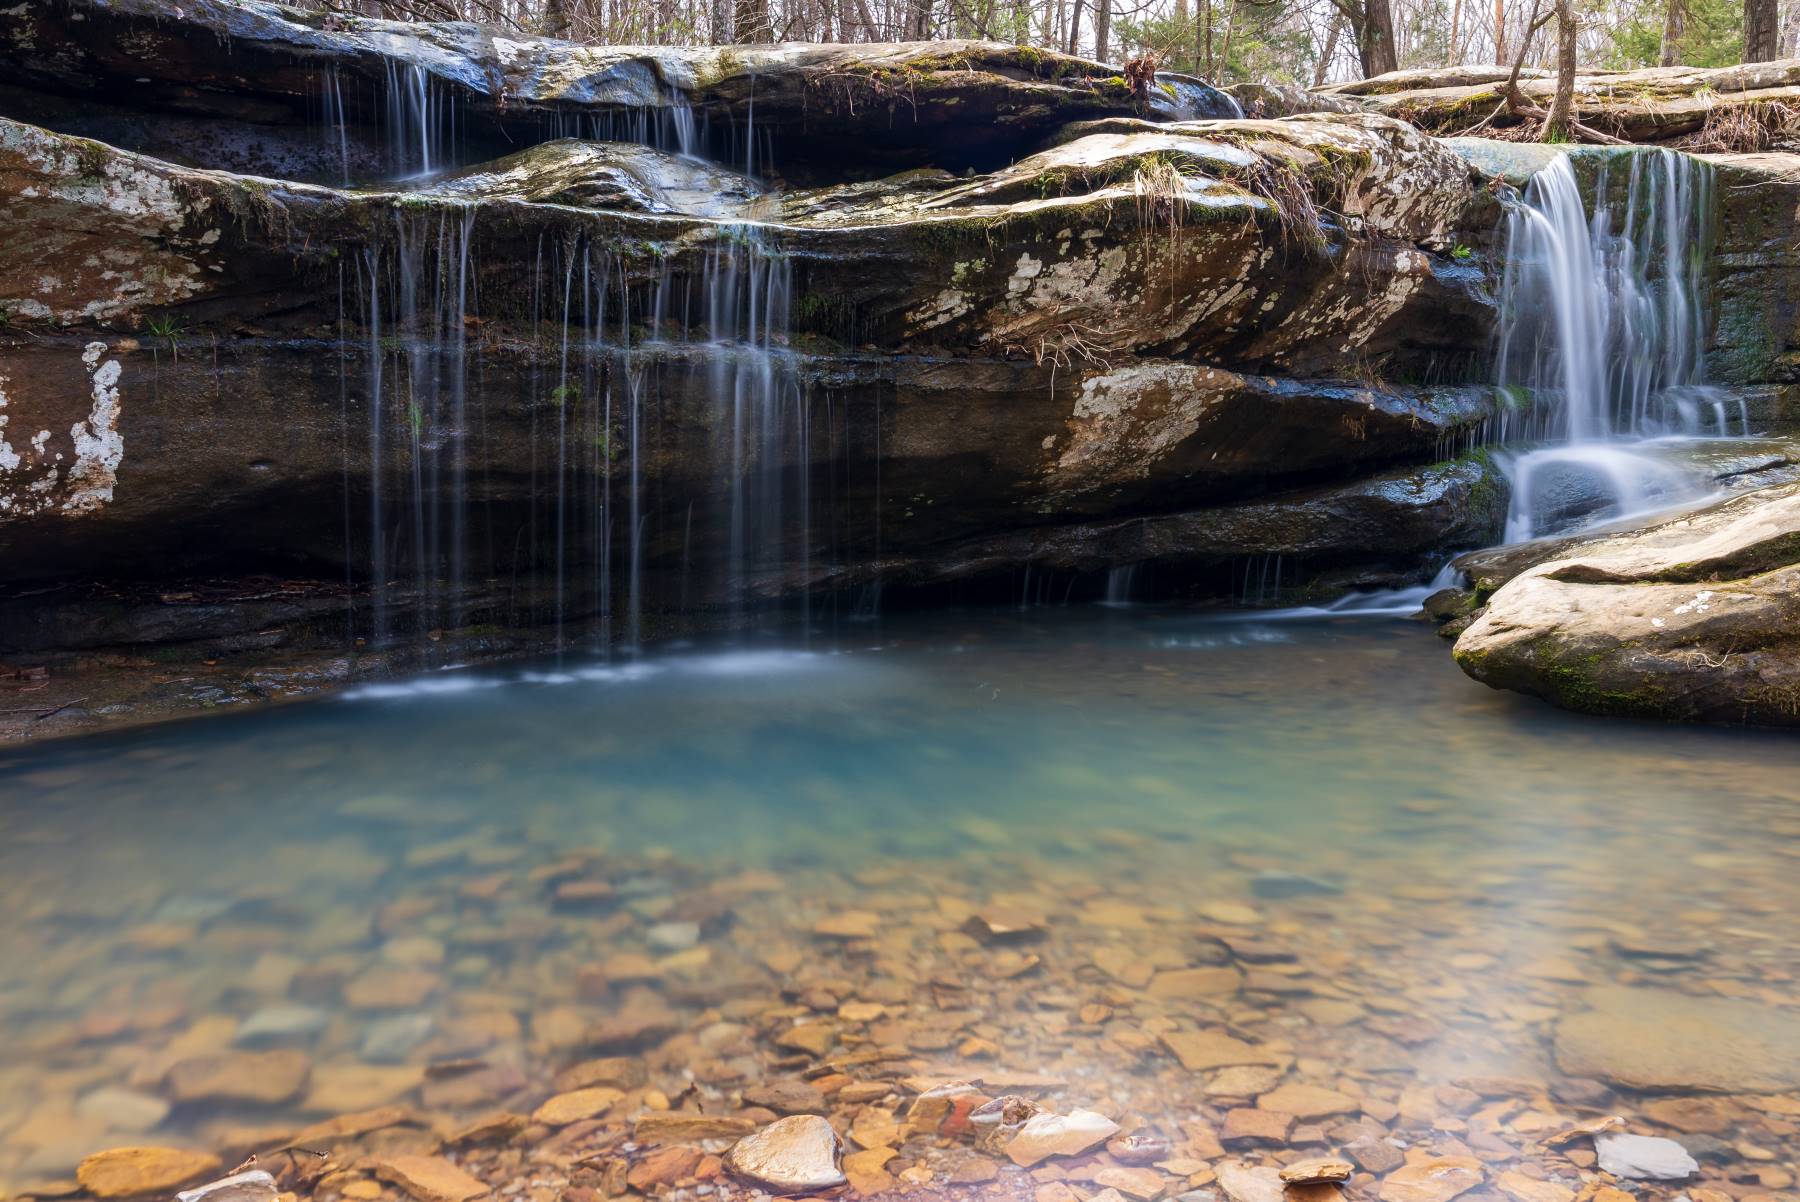 Burden Falls in Shawnee National Forest after a lot of rain in the Midwest